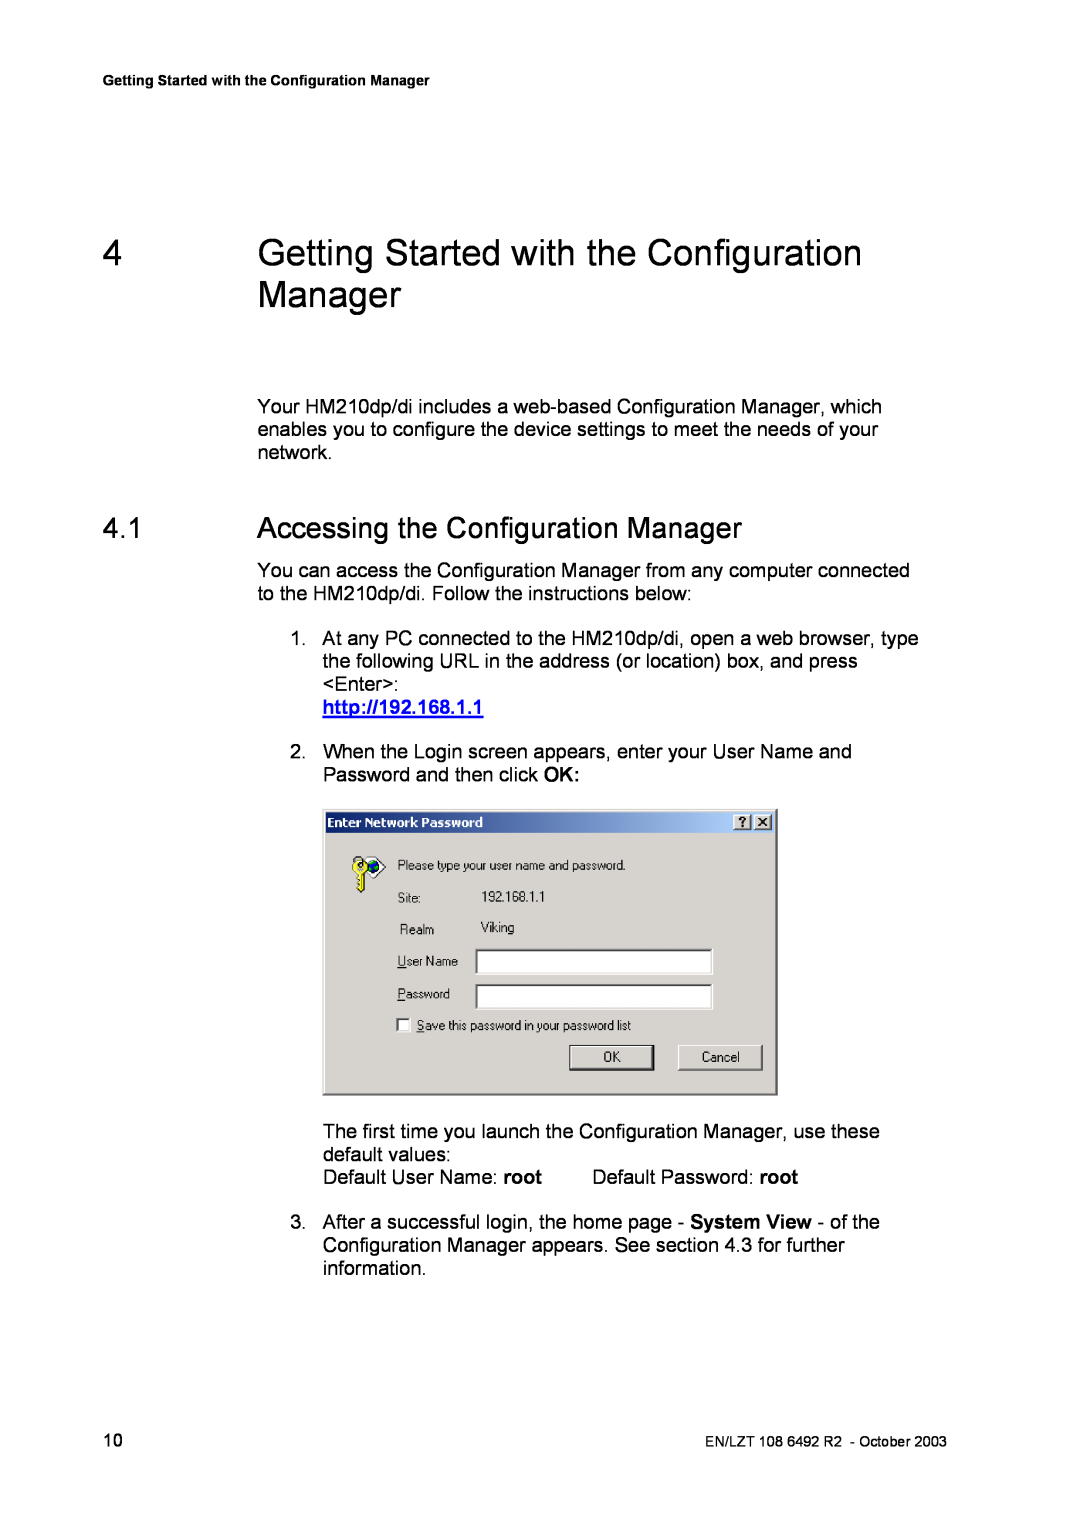 Garmin HM210DP/DI manual Getting Started with the Configuration, Accessing the Configuration Manager, http//192.168.1.1 